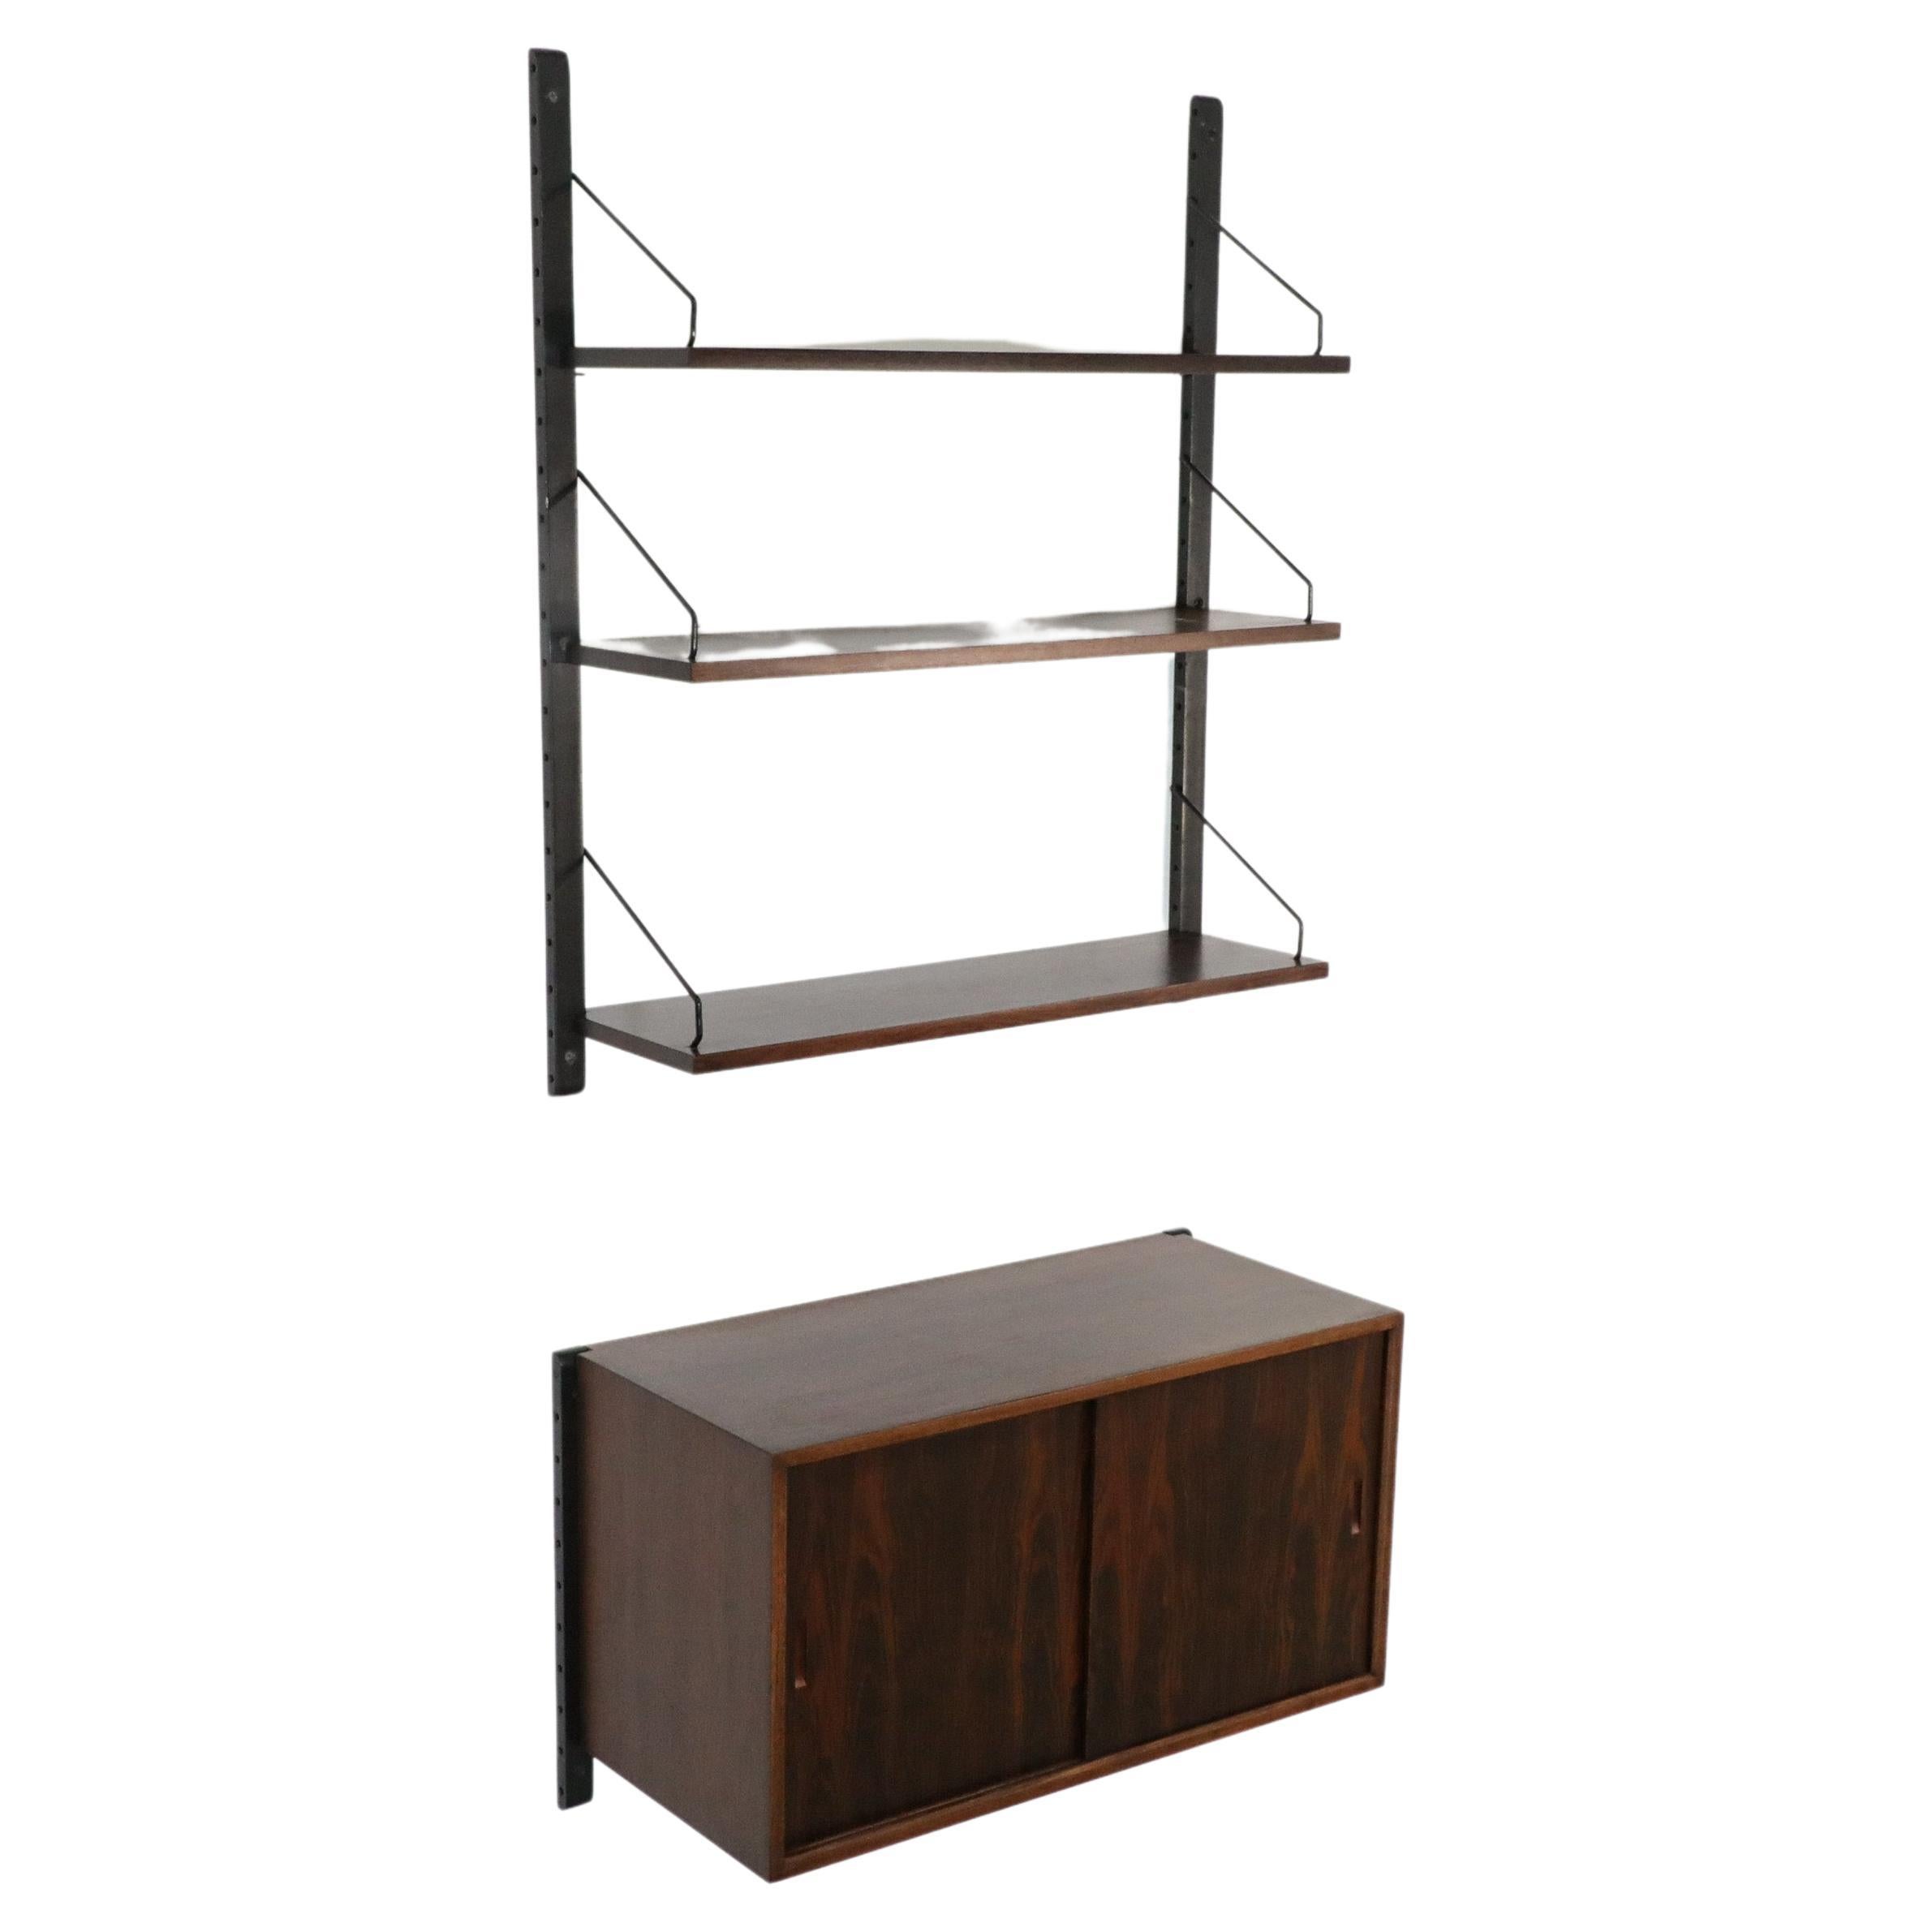 Poul Cadovius Royal Shelving Rosewood Wall Mount Shelving Unit and Cabinet